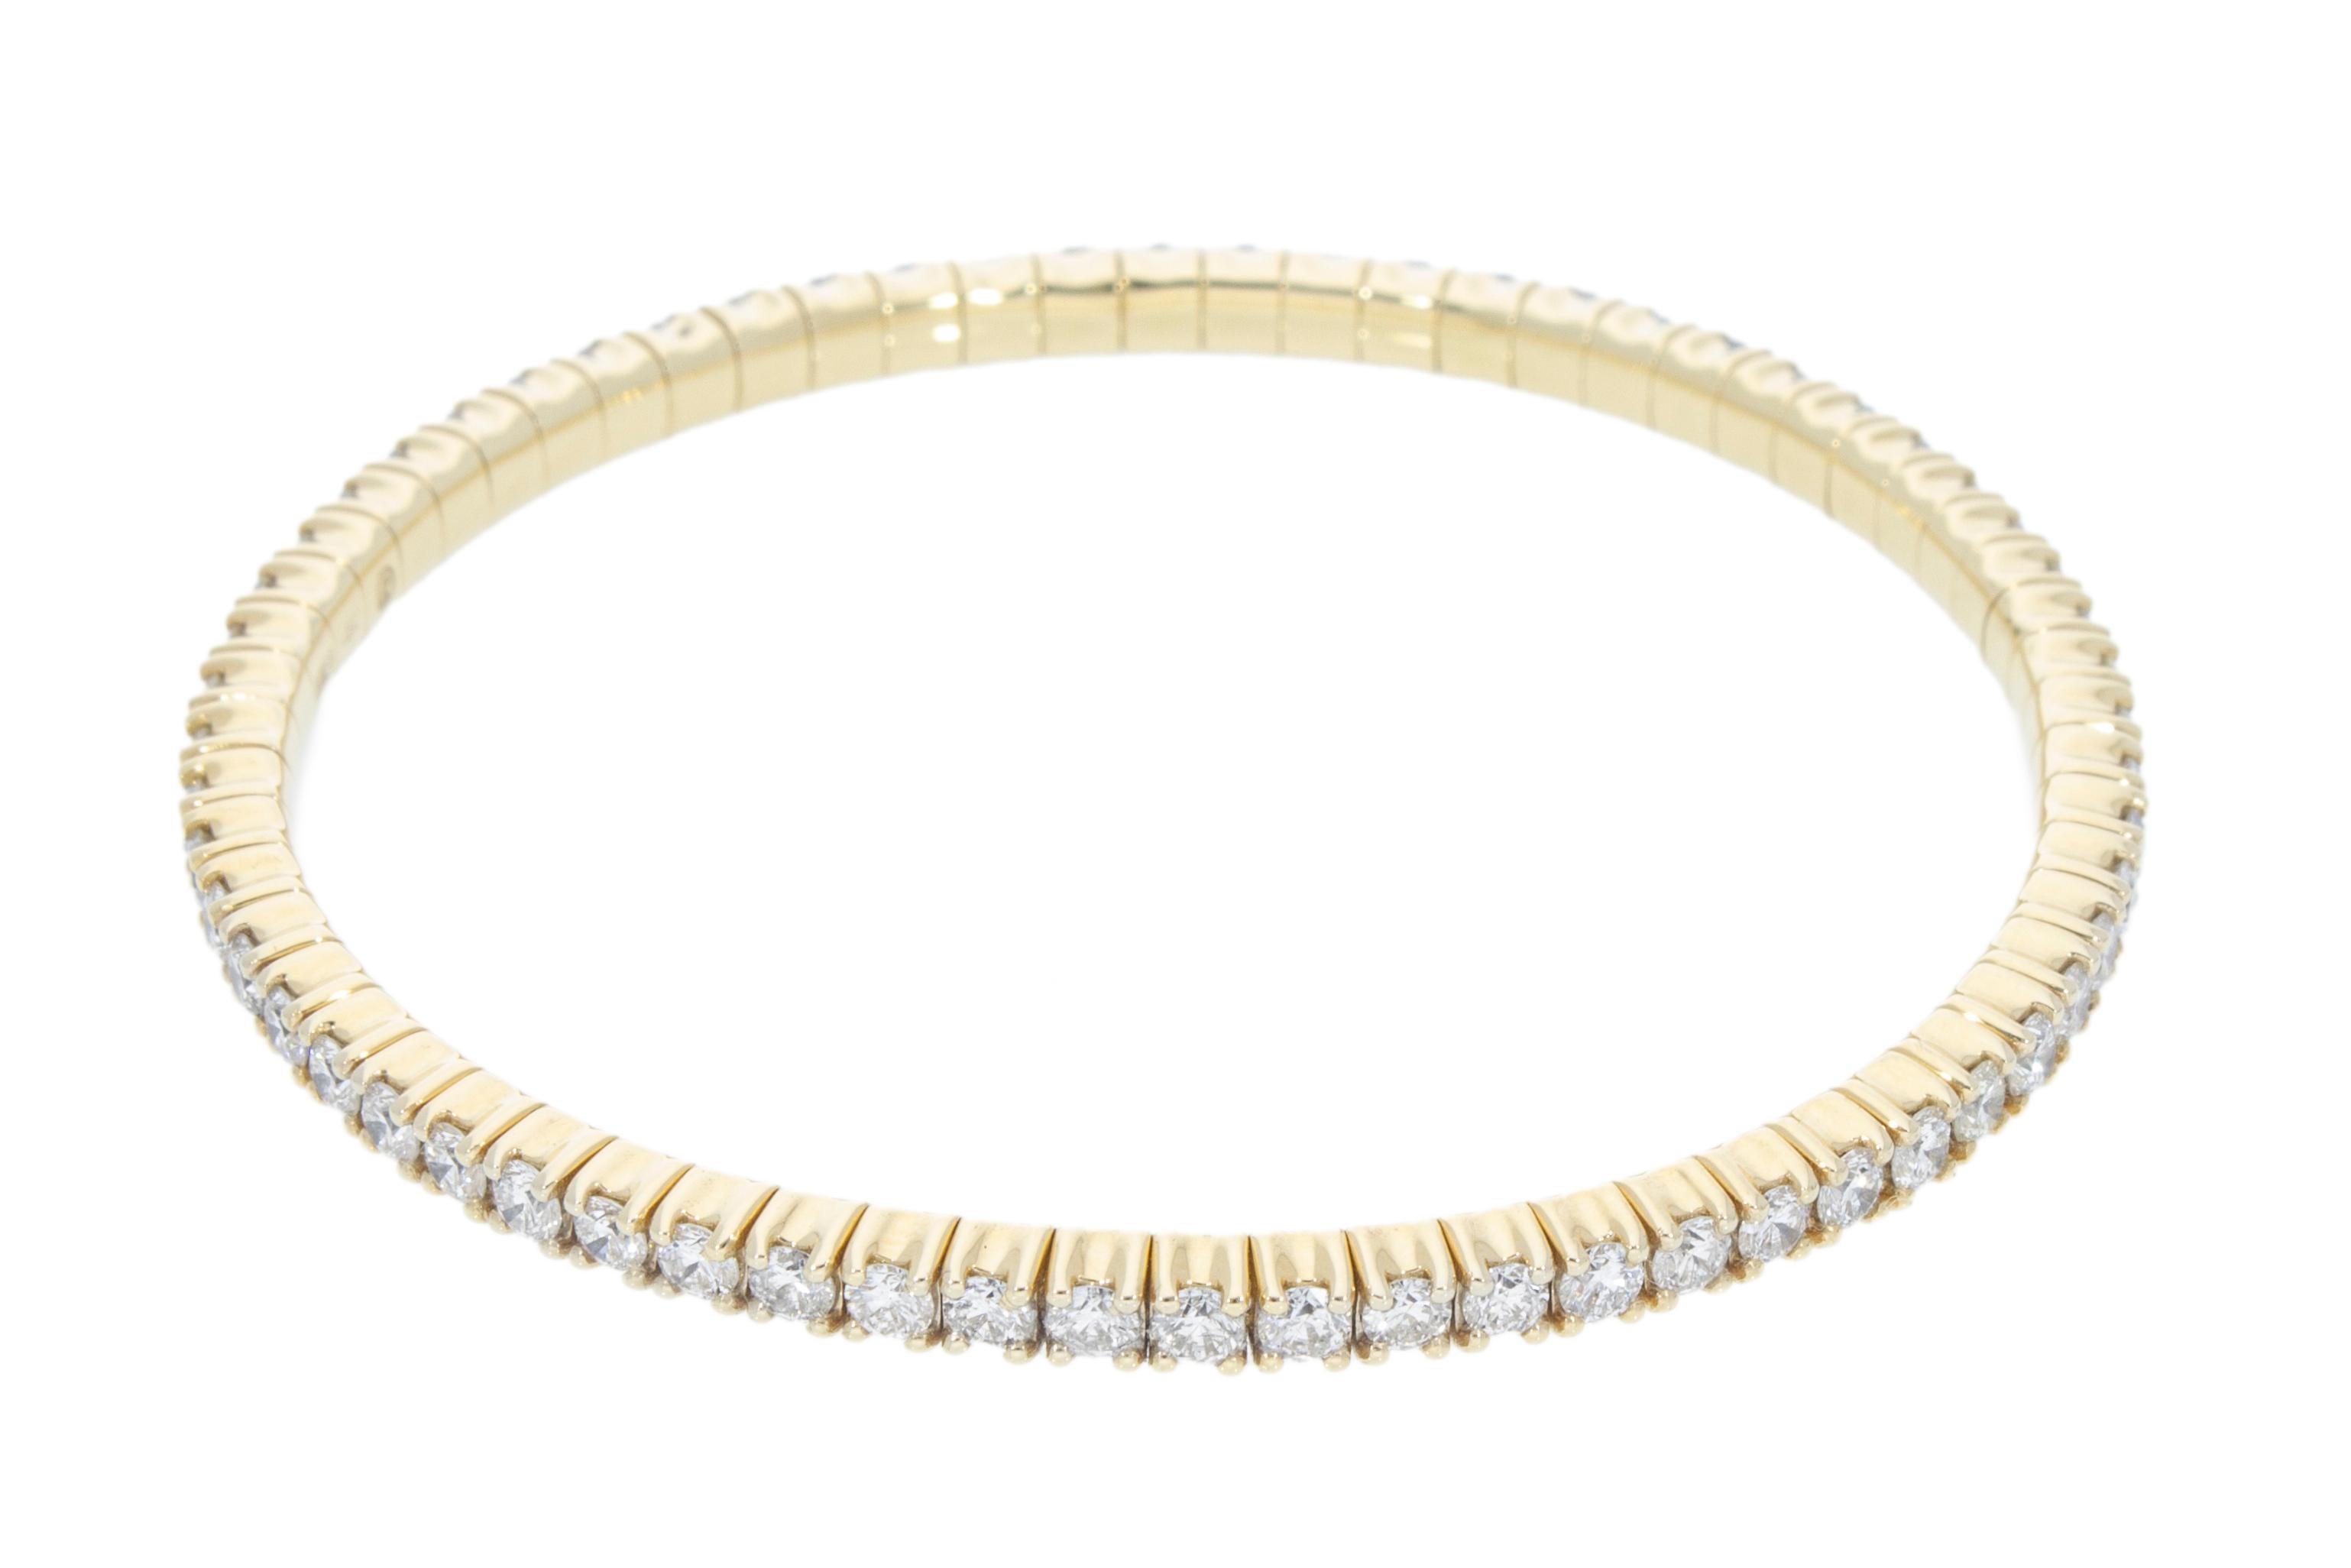 Modern Carat 4.30 Elastic Diamond Tennis Bracelet. Yellow Gold 18 Kt. Made in Italy. For Sale